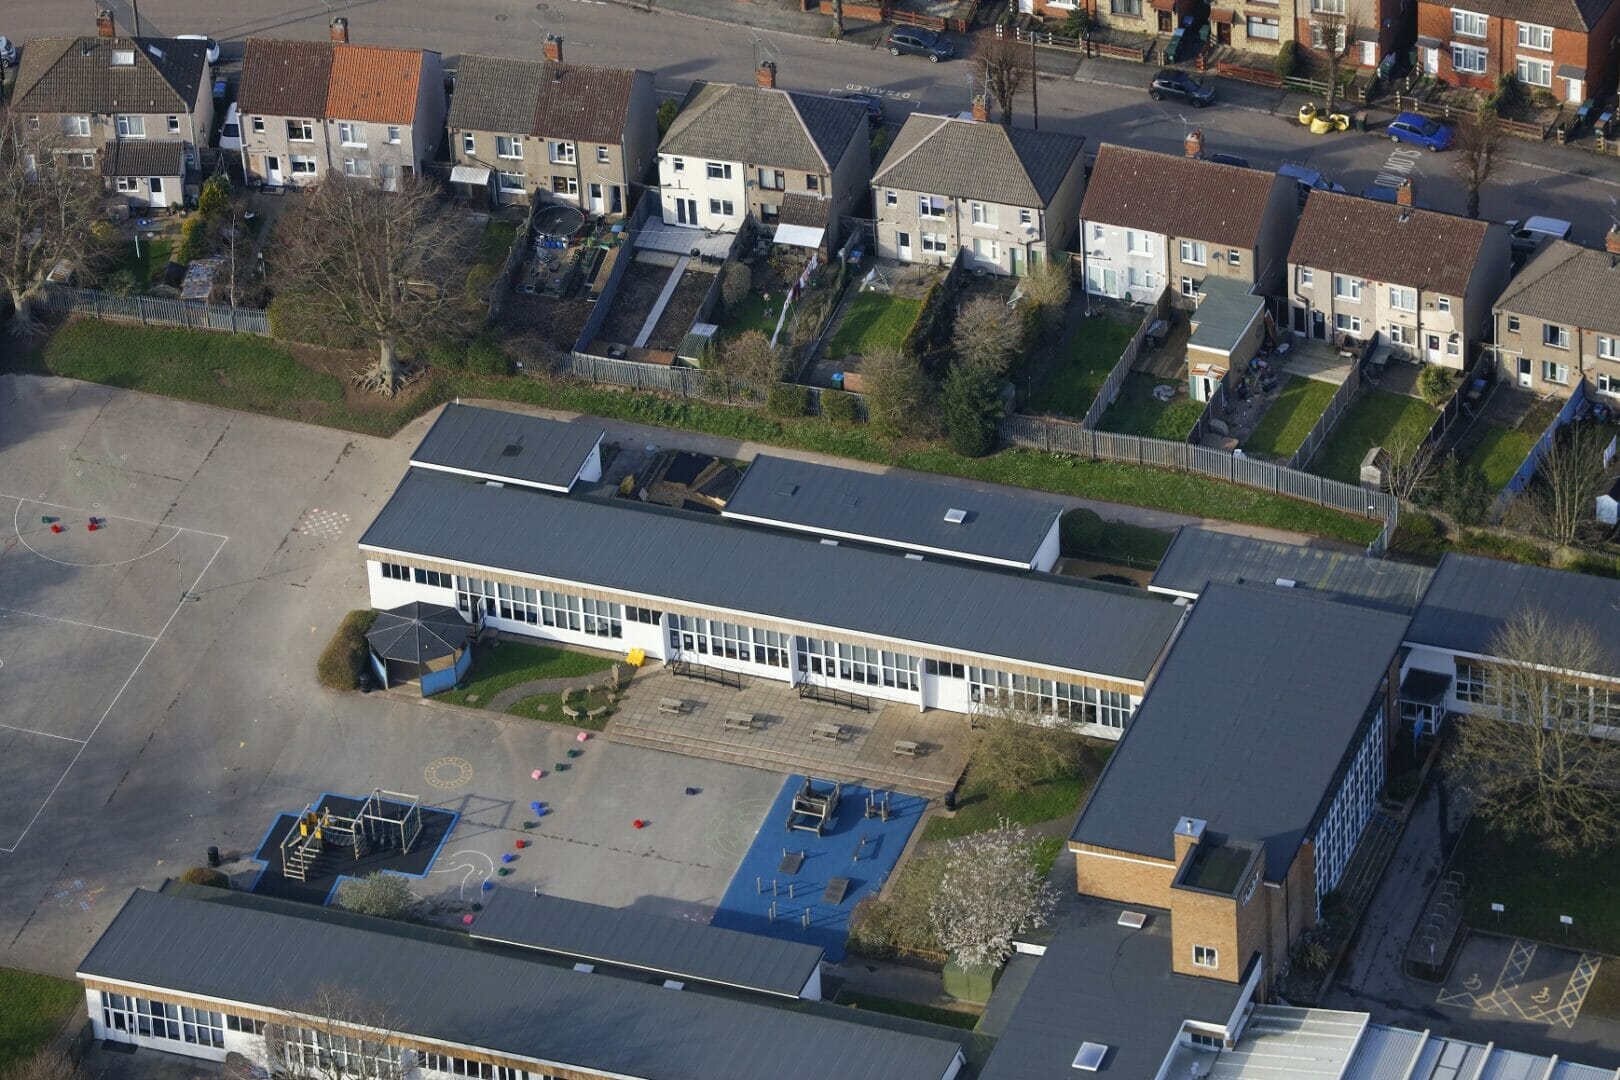 Trusted capability  and single source for roof refurbishment wins through @langley_uk